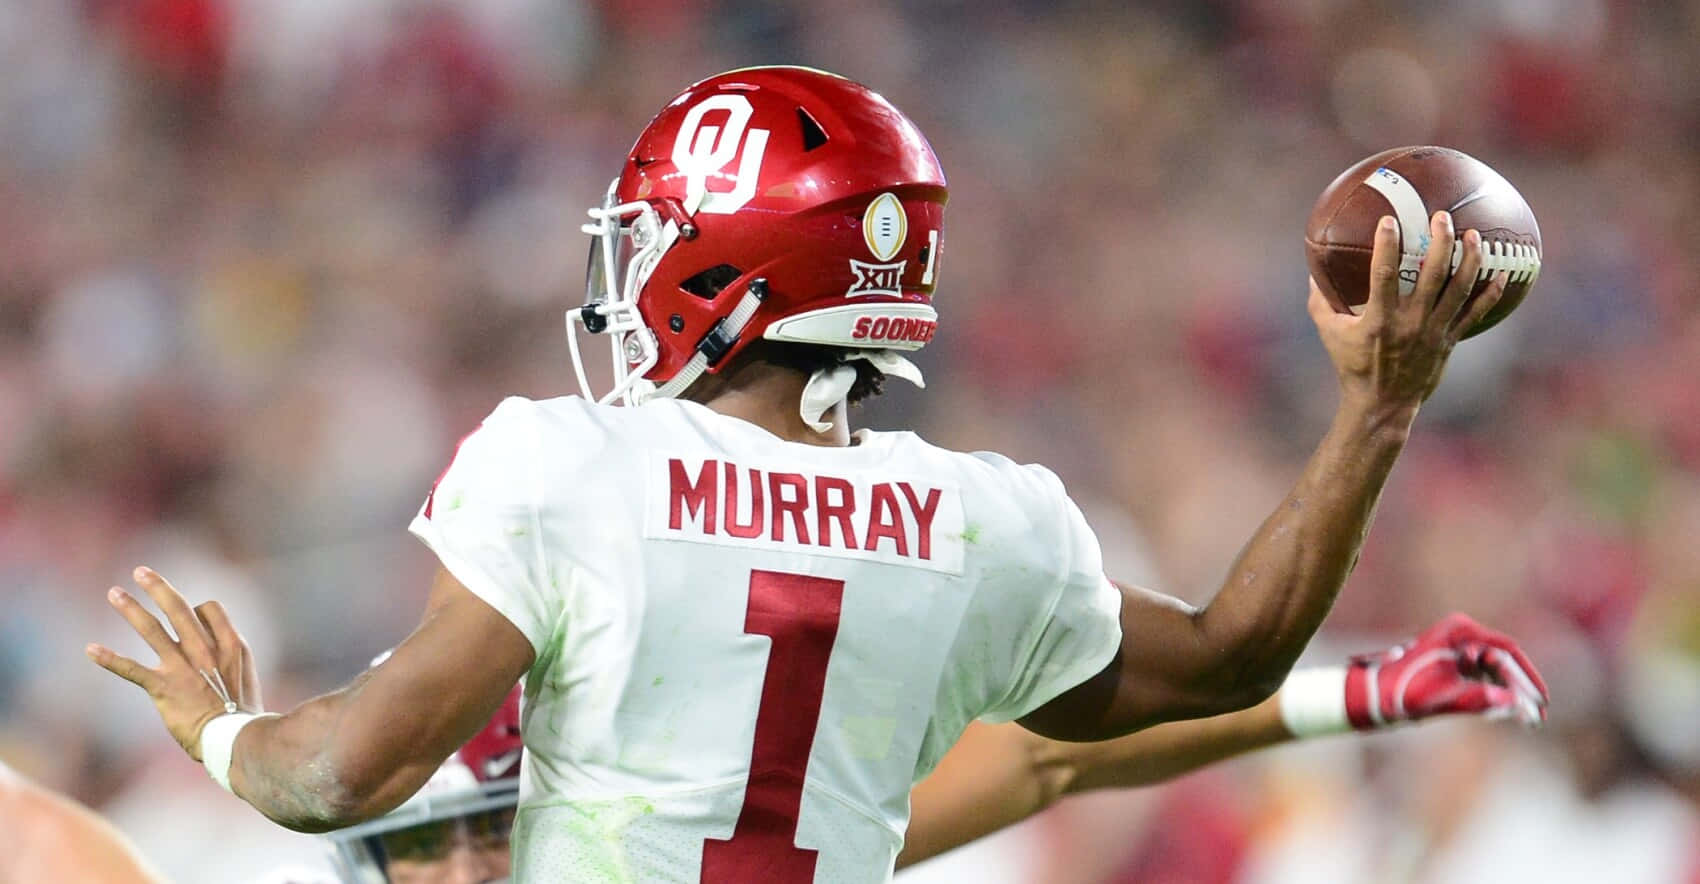 Oklahoma Quarterback Mike Murray Throws The Ball During A Game